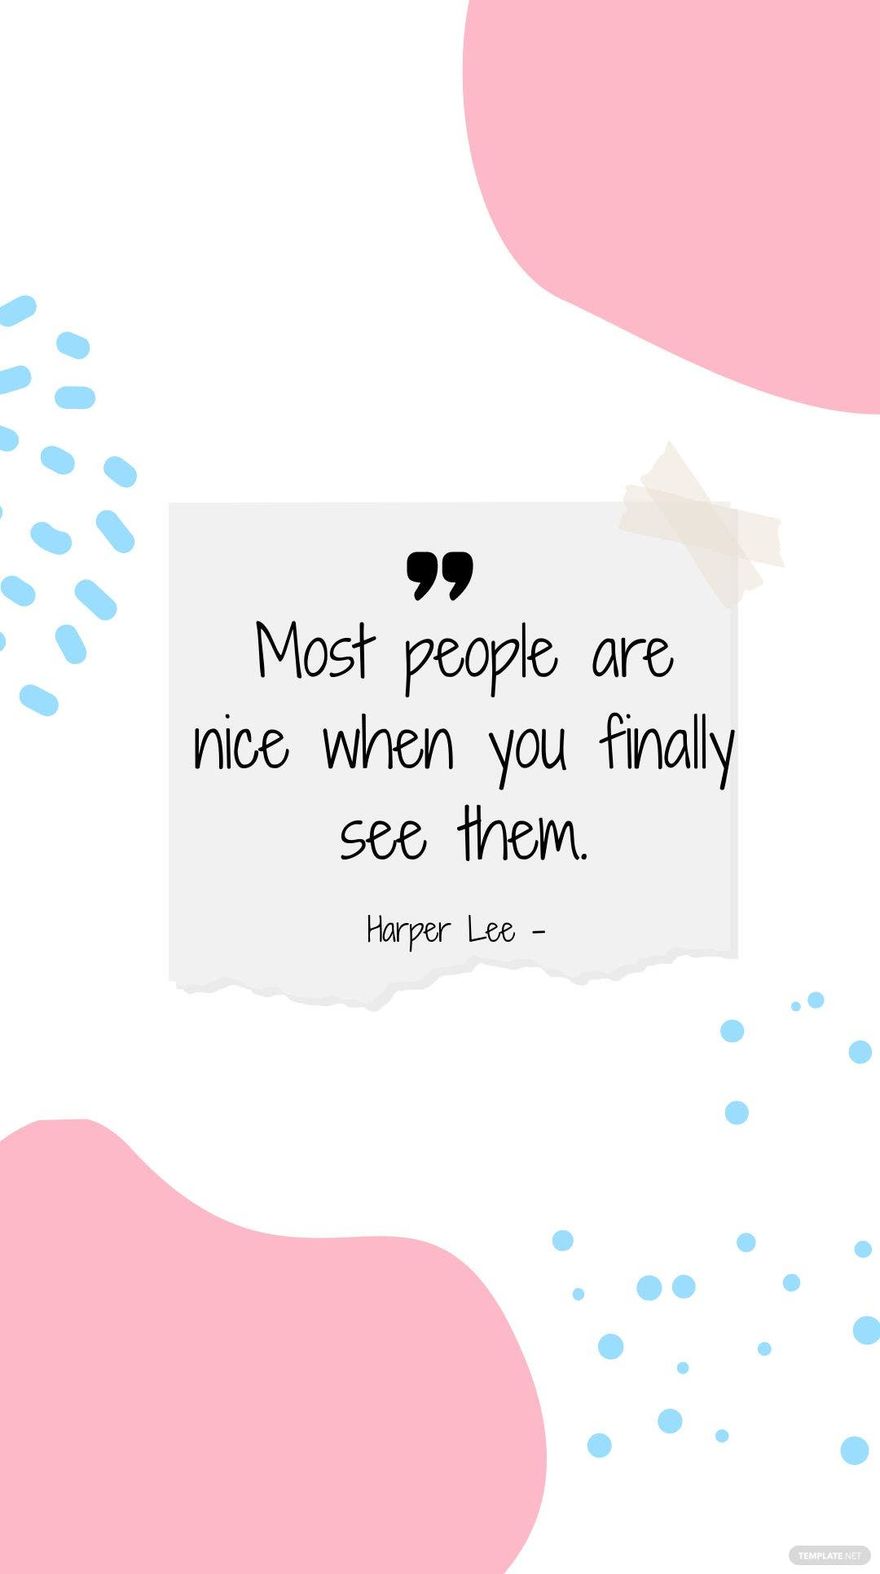 Harper Lee - Most people are nice when you finally see them.